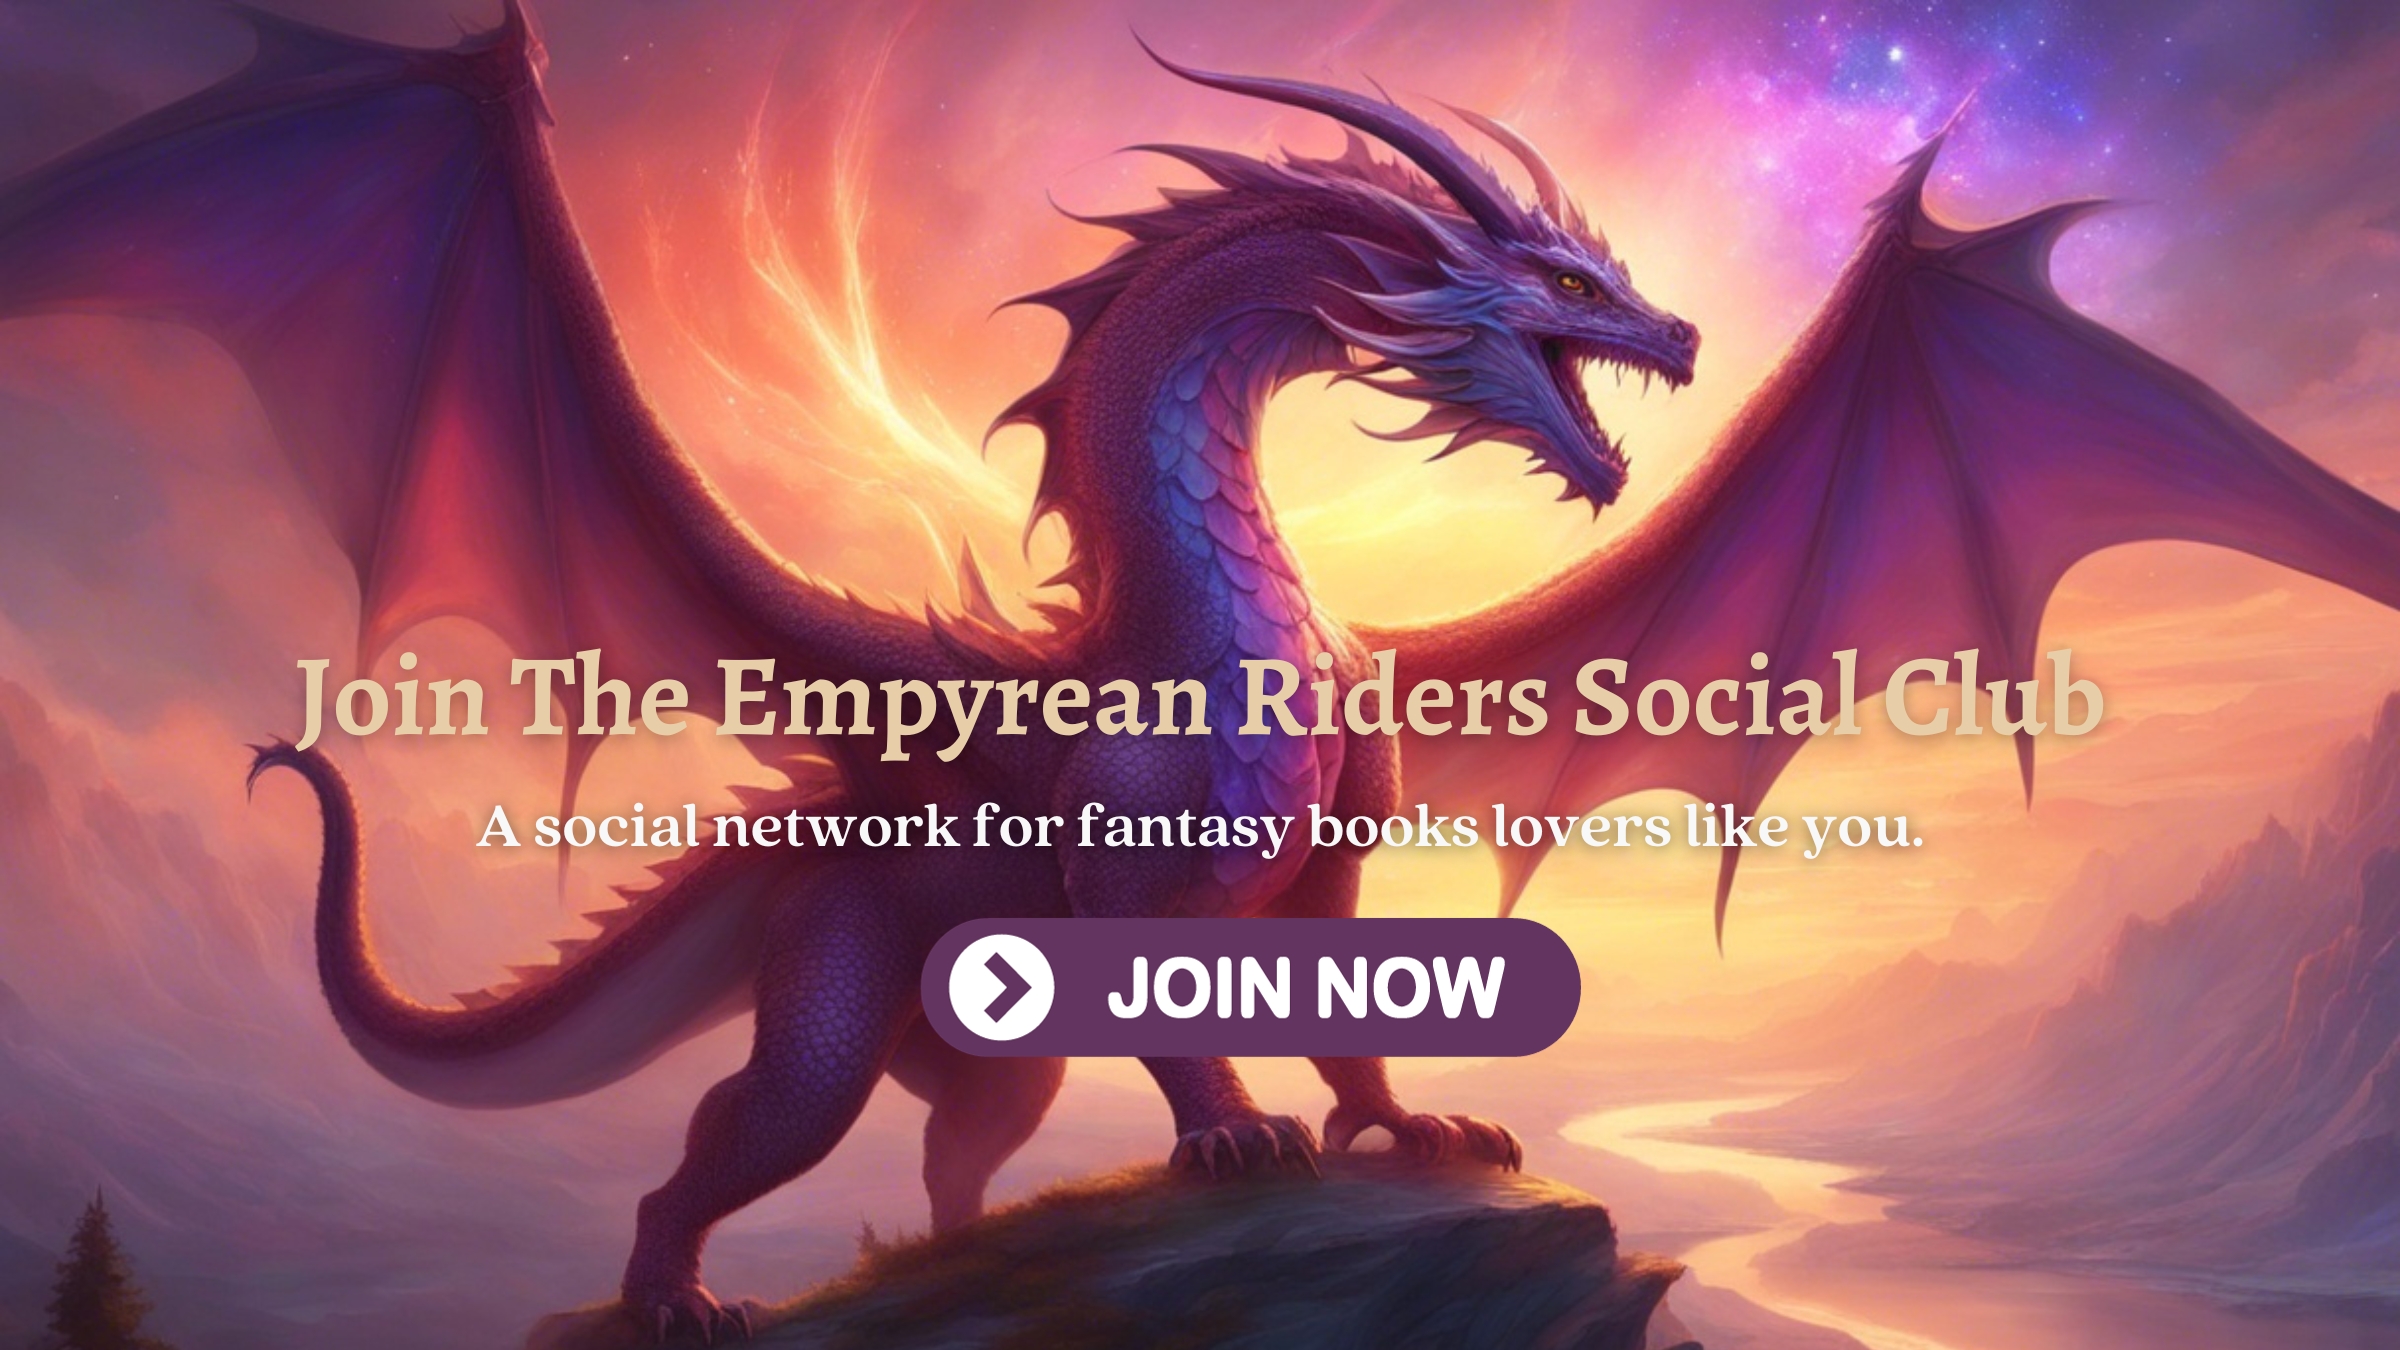 Empyrean Riders social club - social network for book lovers like you